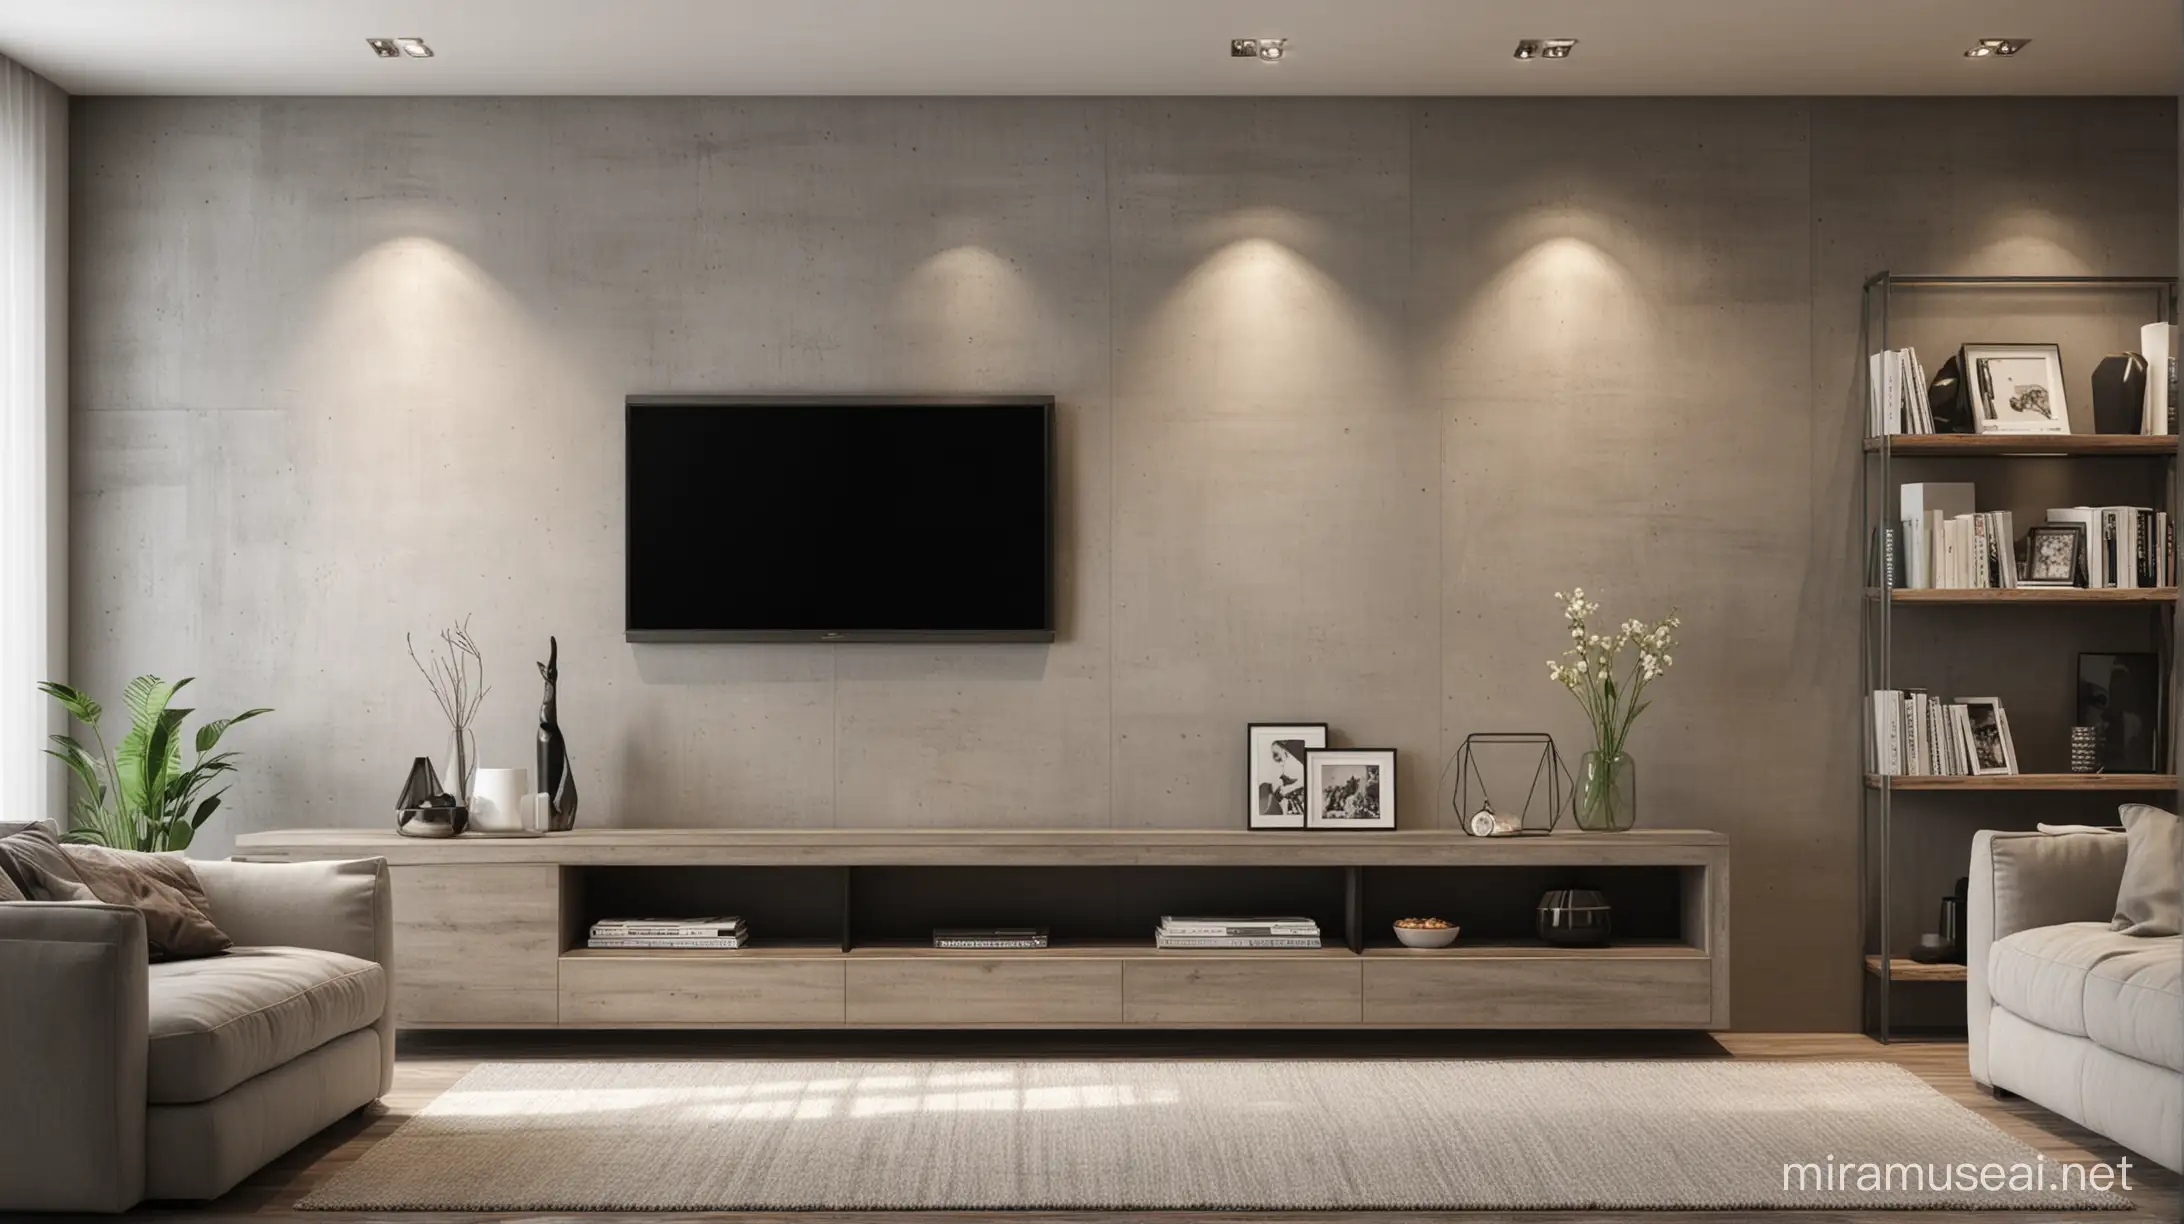 Modern Interior Wall Design with Clean Lines and Contemporary Decor